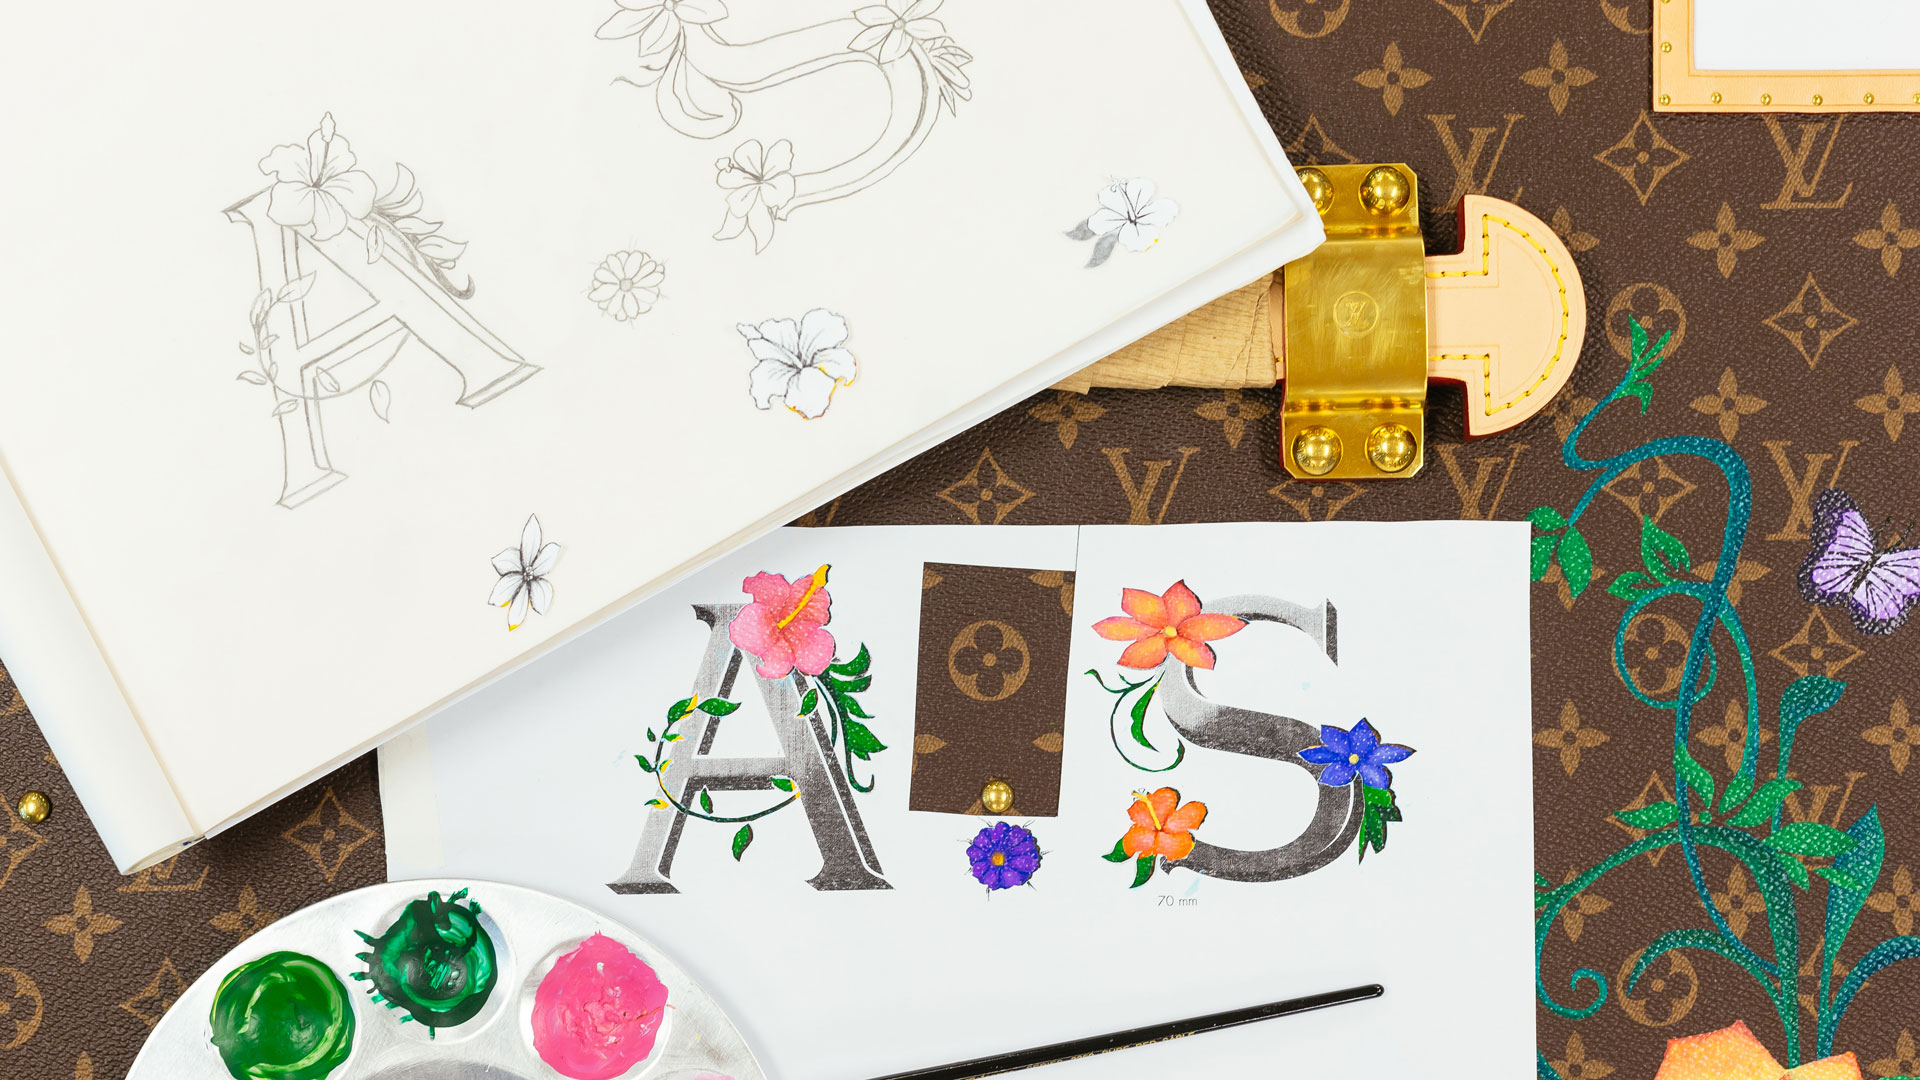 Louis Vuitton's New Personalization Service: Make It Yours